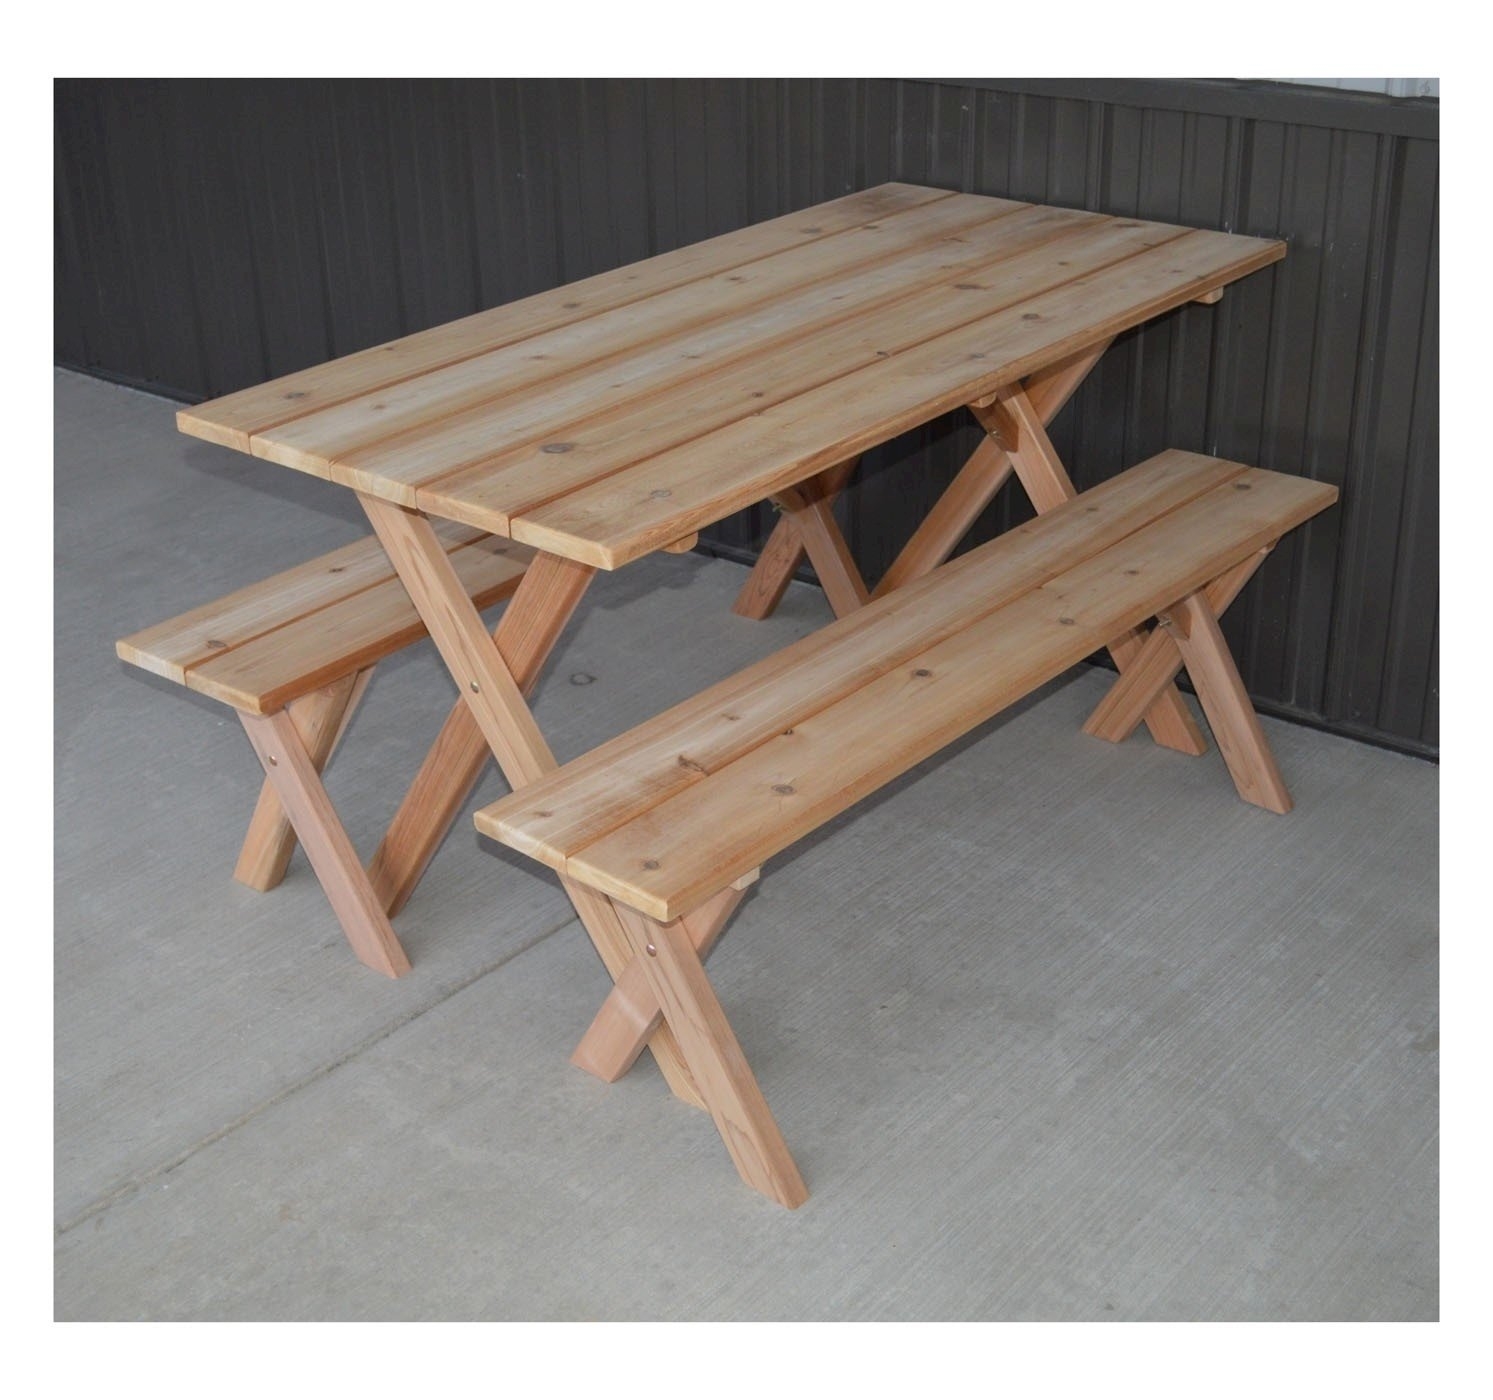 Wooden picnic table with detached benches